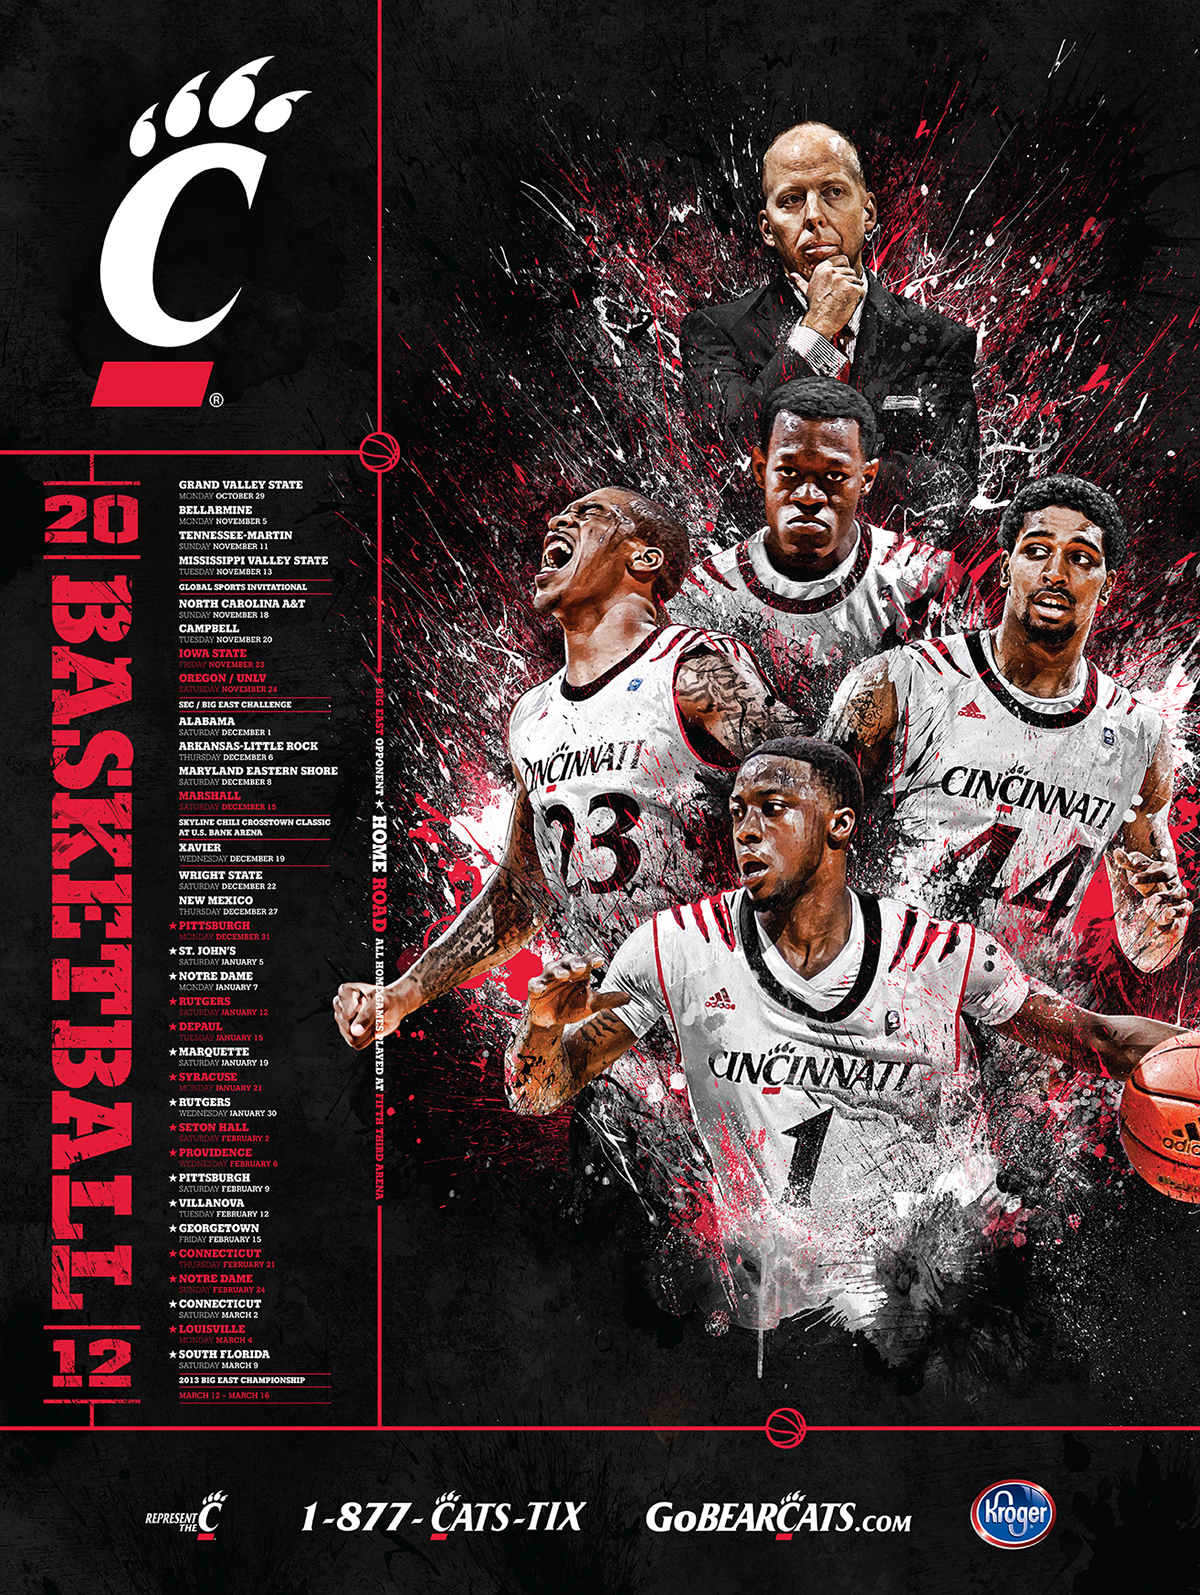 basketball sports poster NCAA photoshop paint cincinnati Bearcats Style expressive type collage soccer golf